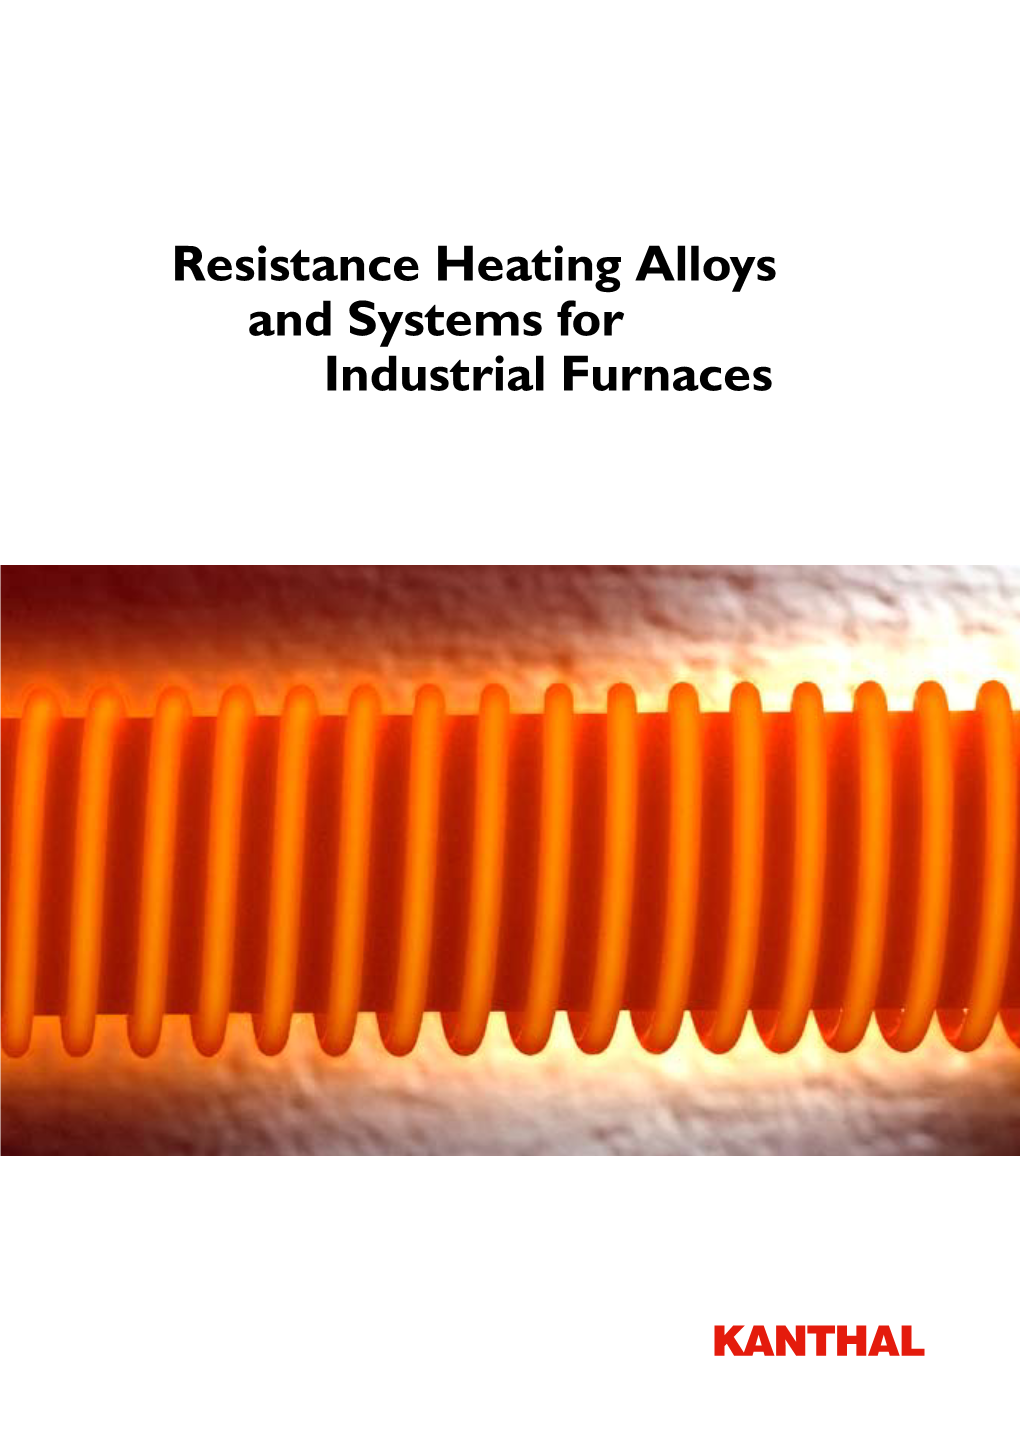 Resistance Heating Alloys and Systems for Industrial Furnaces Catalogue 1-A-5B-3 US 11-07-3000